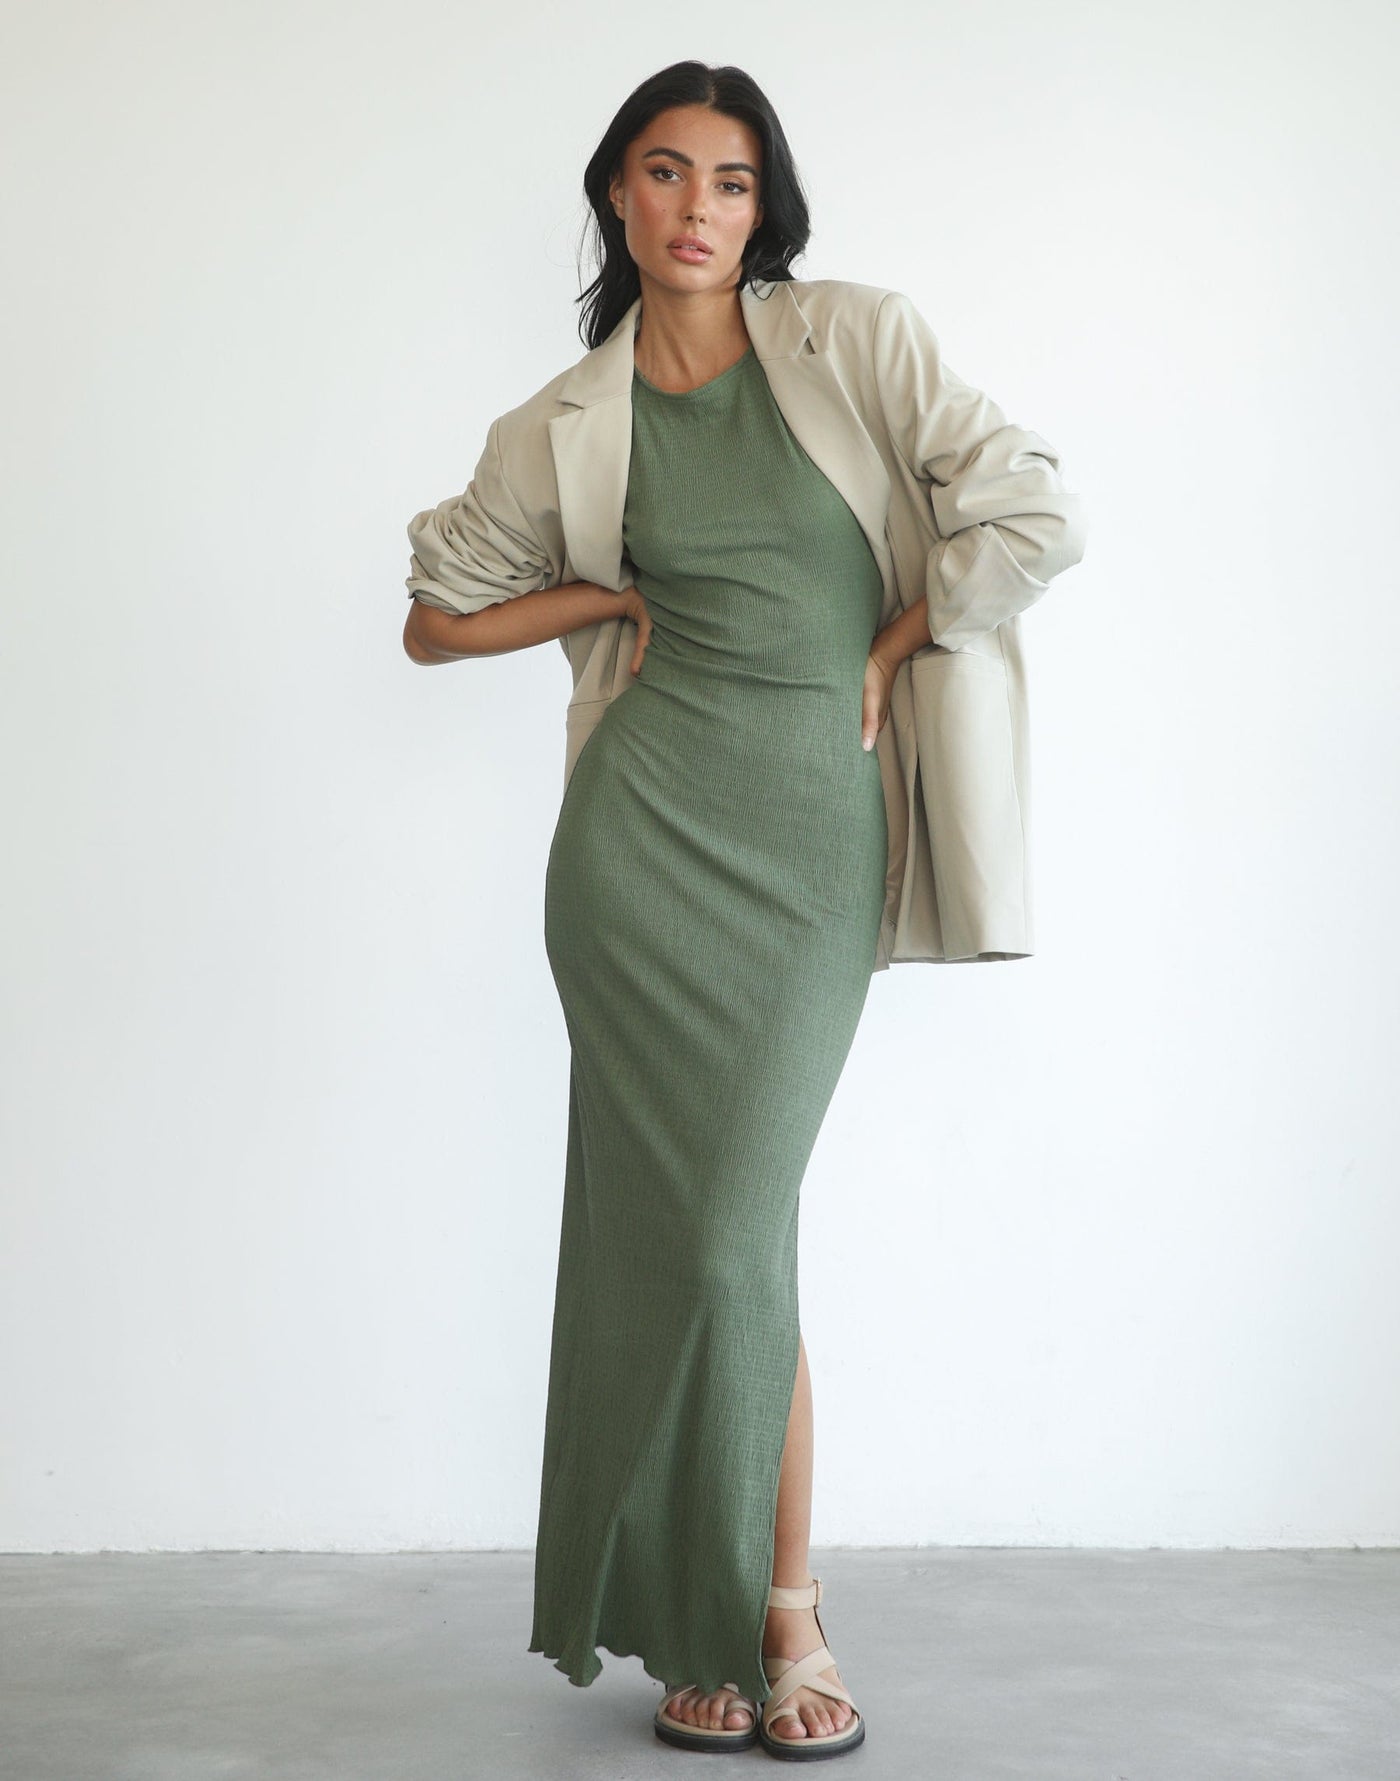 As It Was Maxi Dress (Olive) - Olive Textured Maxi Dress - Women's Dress - Charcoal Clothing